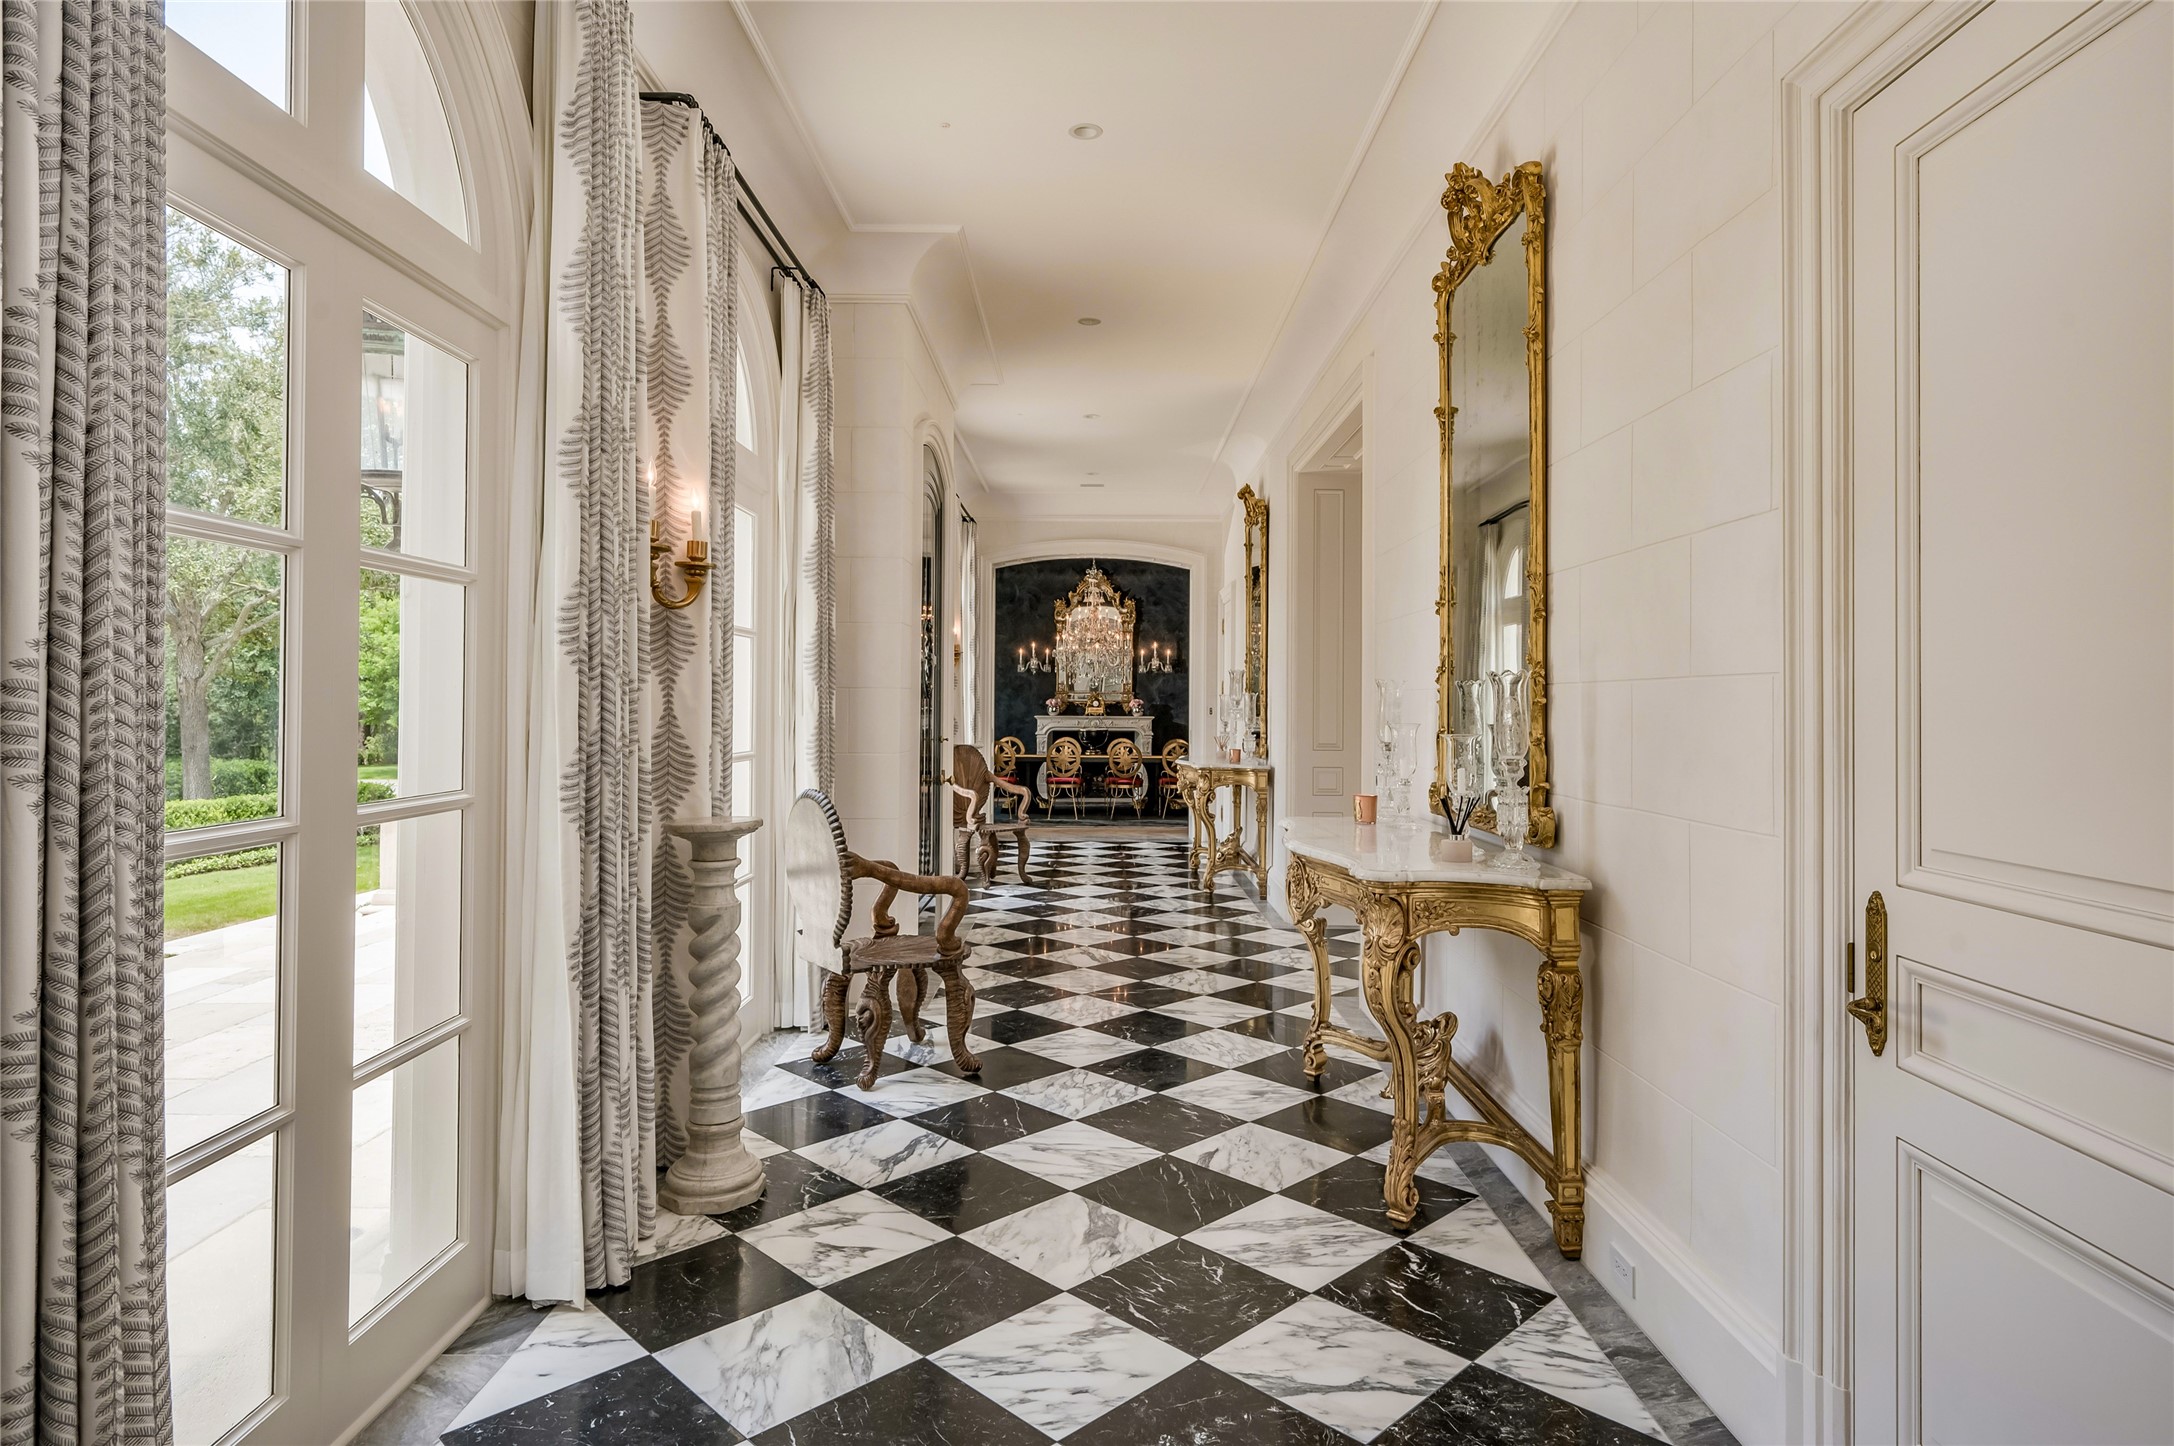 Black and white marble harlequin floors flow seamlessly through the grand foyer and formal living space.